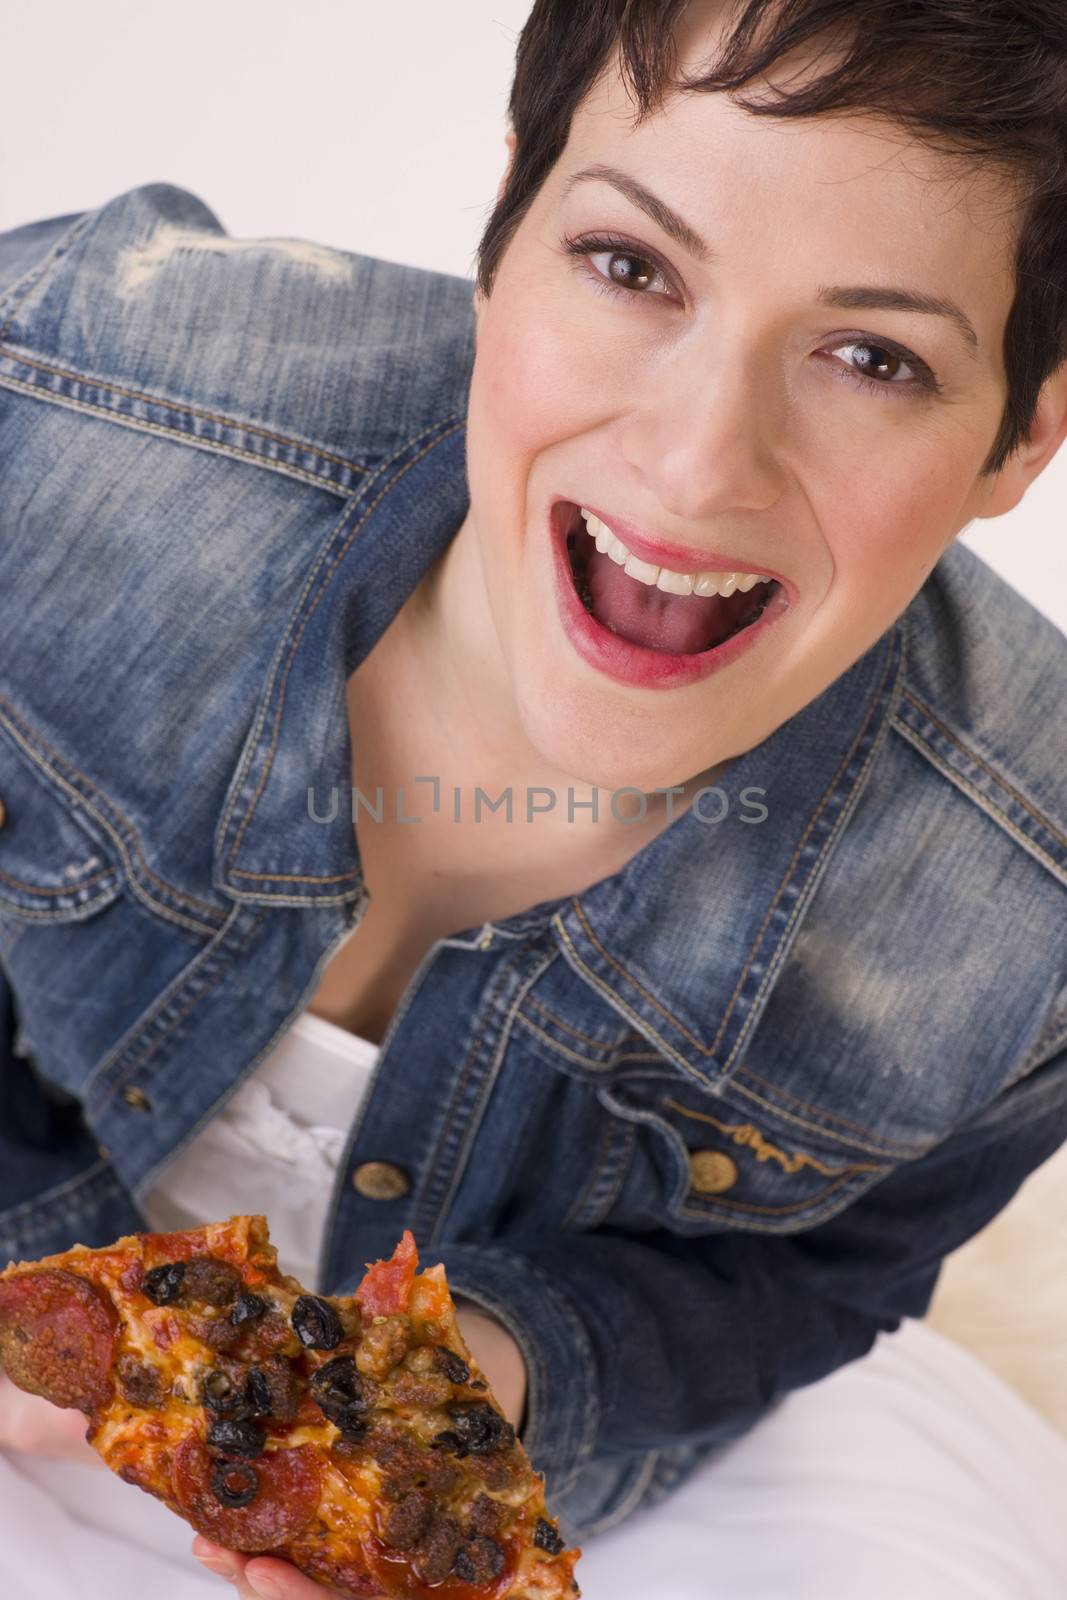 Excited Attractive Woman Eating Hot Pizza Lunch White Background by ChrisBoswell